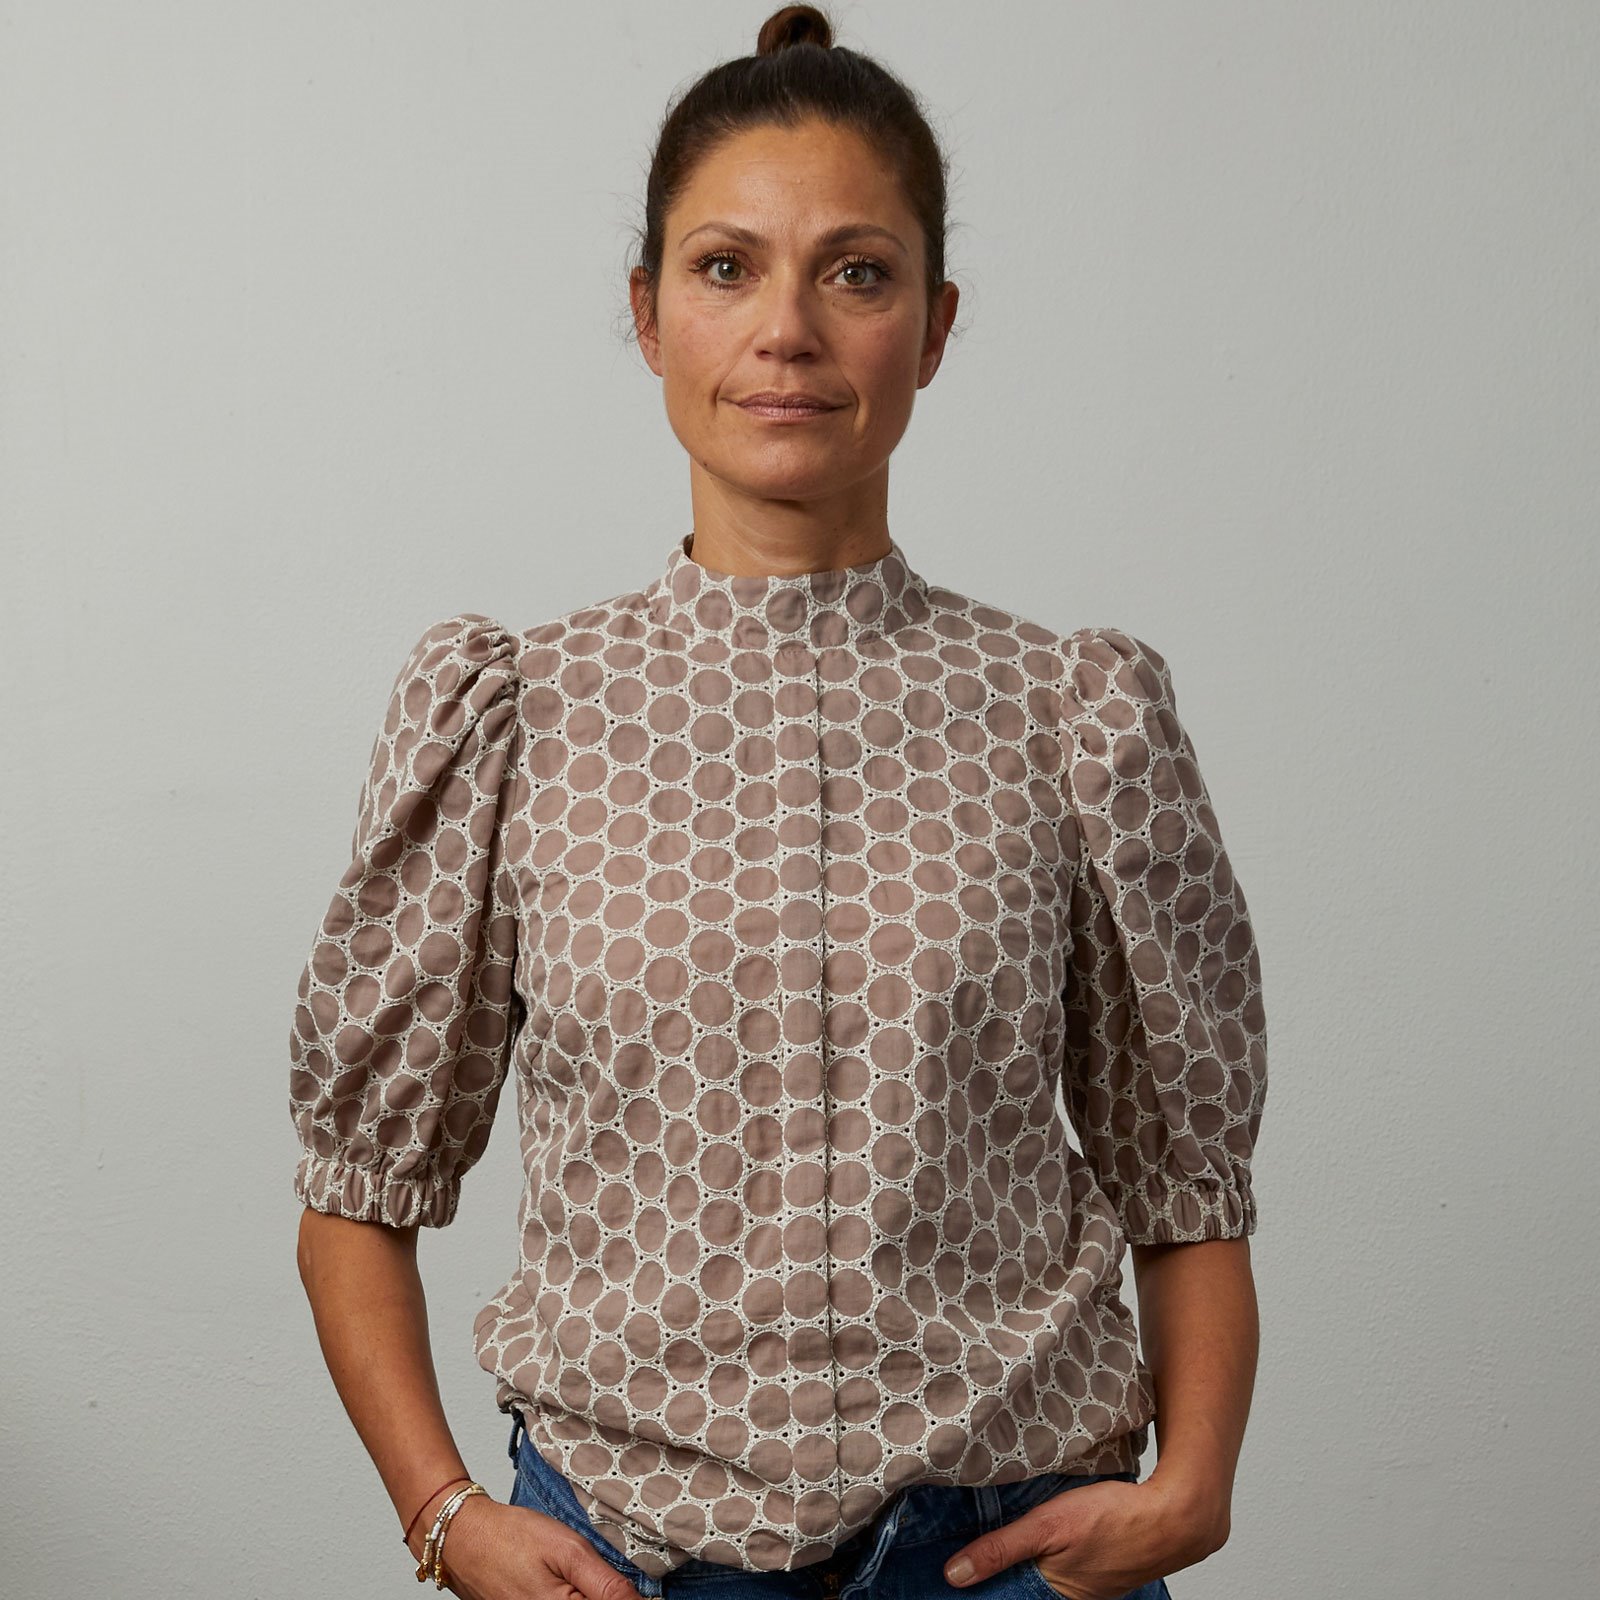 Design your own blouse, 36/8 p22075_cg_image_a.jpg